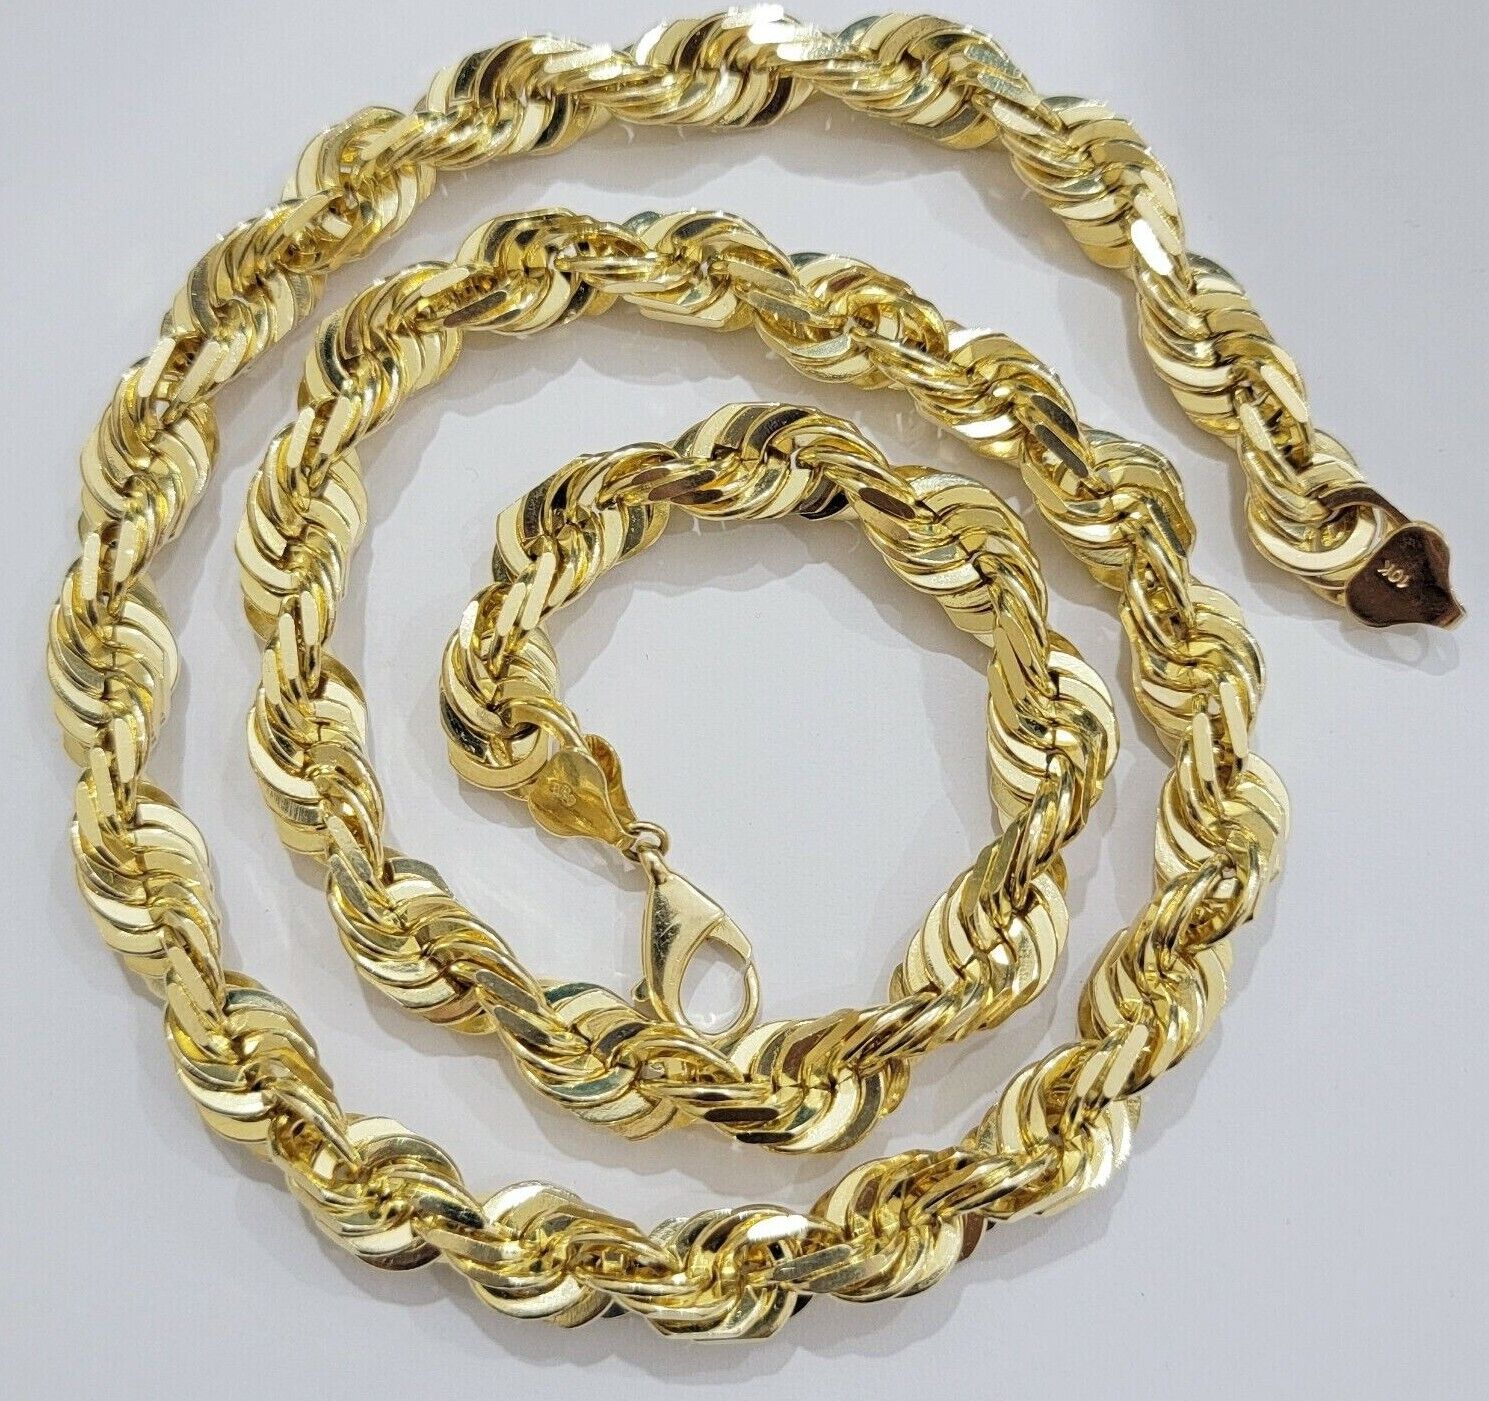 10mm Solid 10k Yellow Gold Rope Chain Necklace 26" Inch Mens Thick & Heavy Shiny